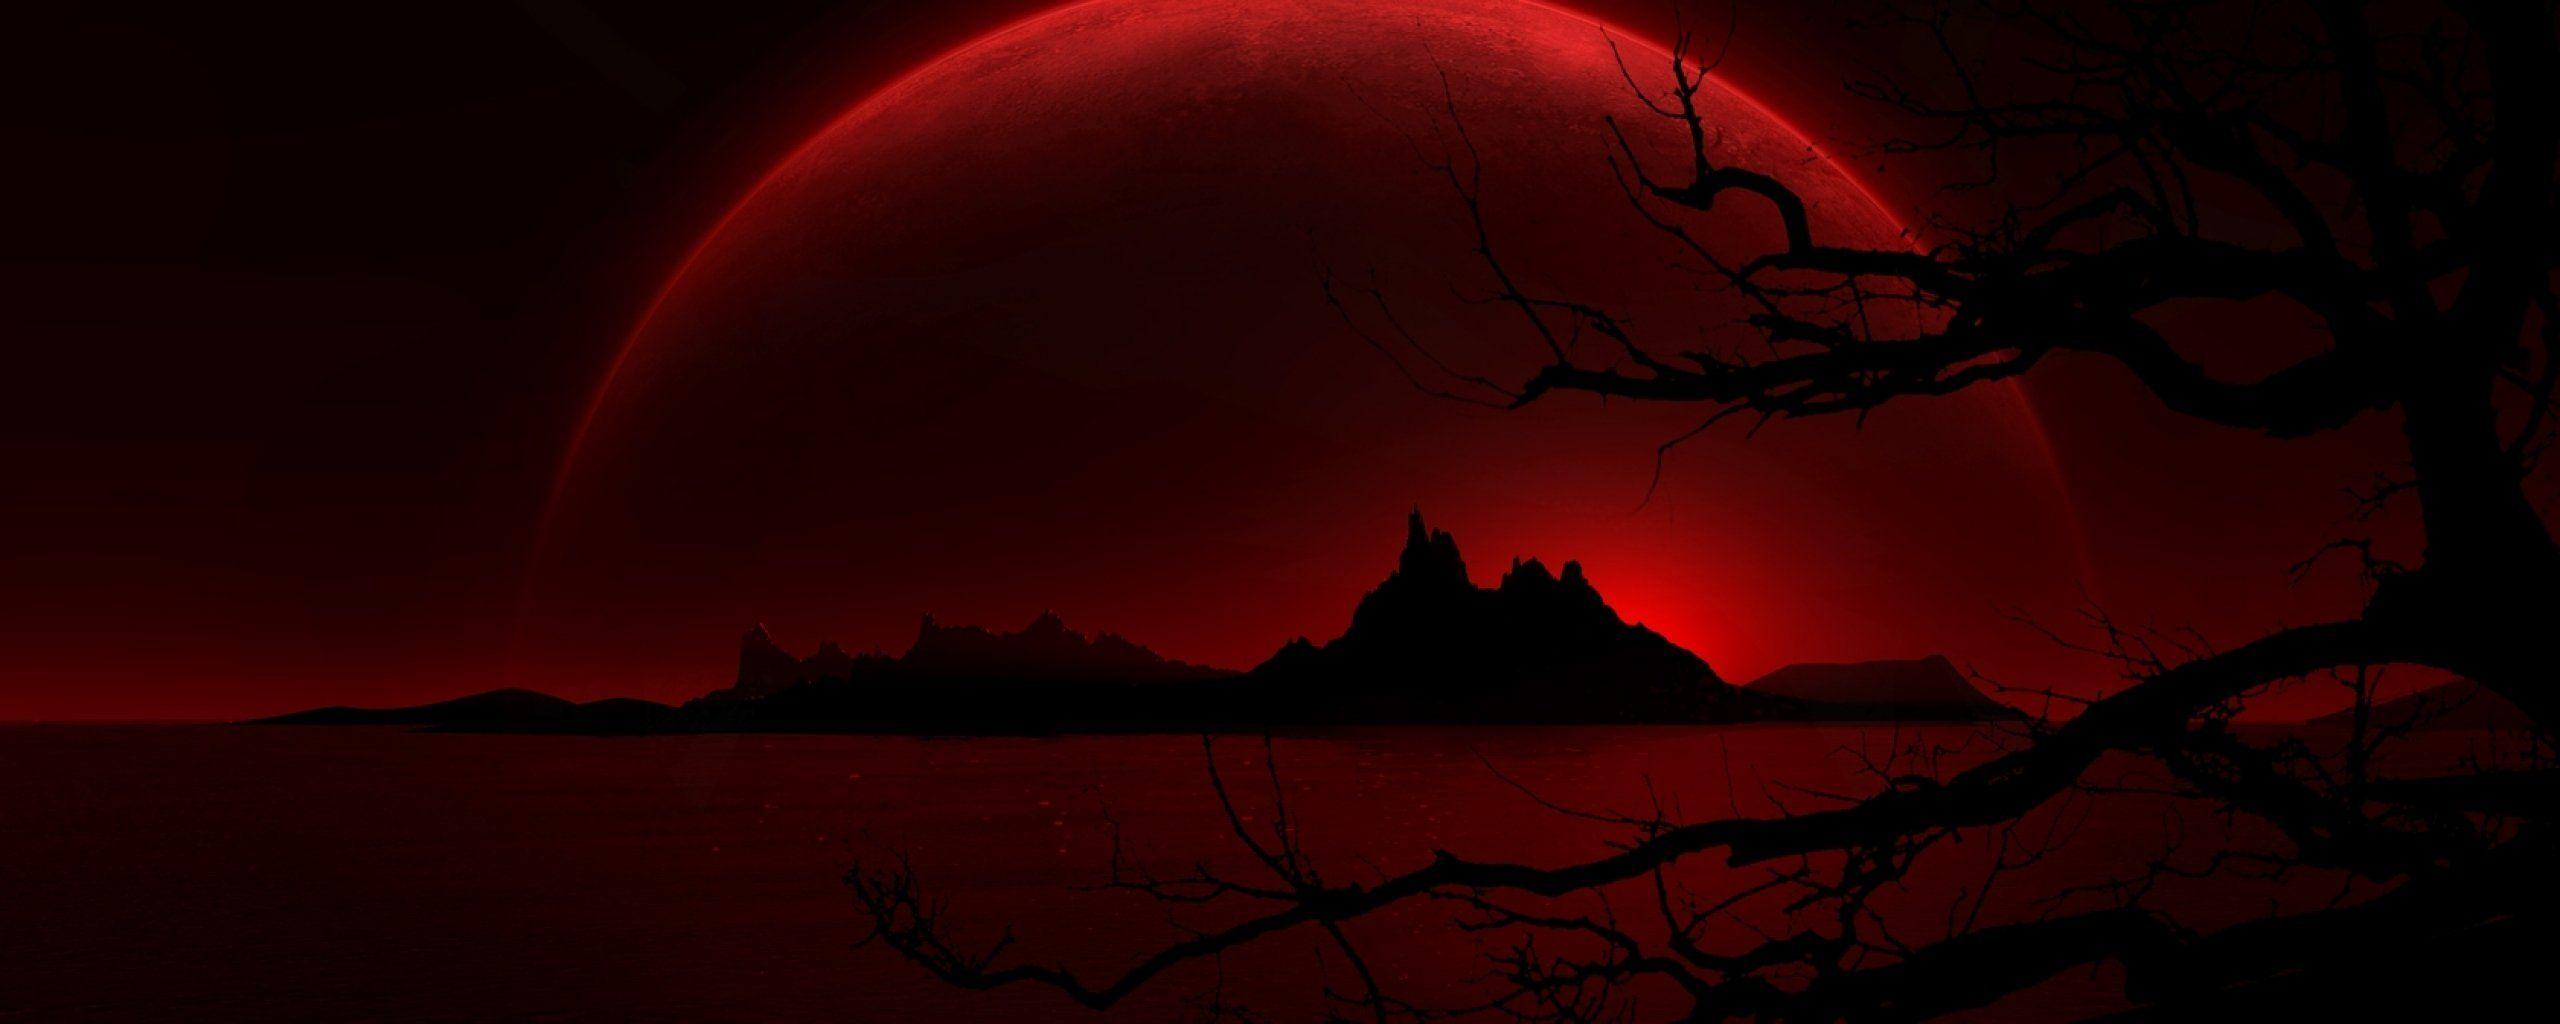 Red Dual Screen Wallpapers - Top Free Red Dual Screen Backgrounds